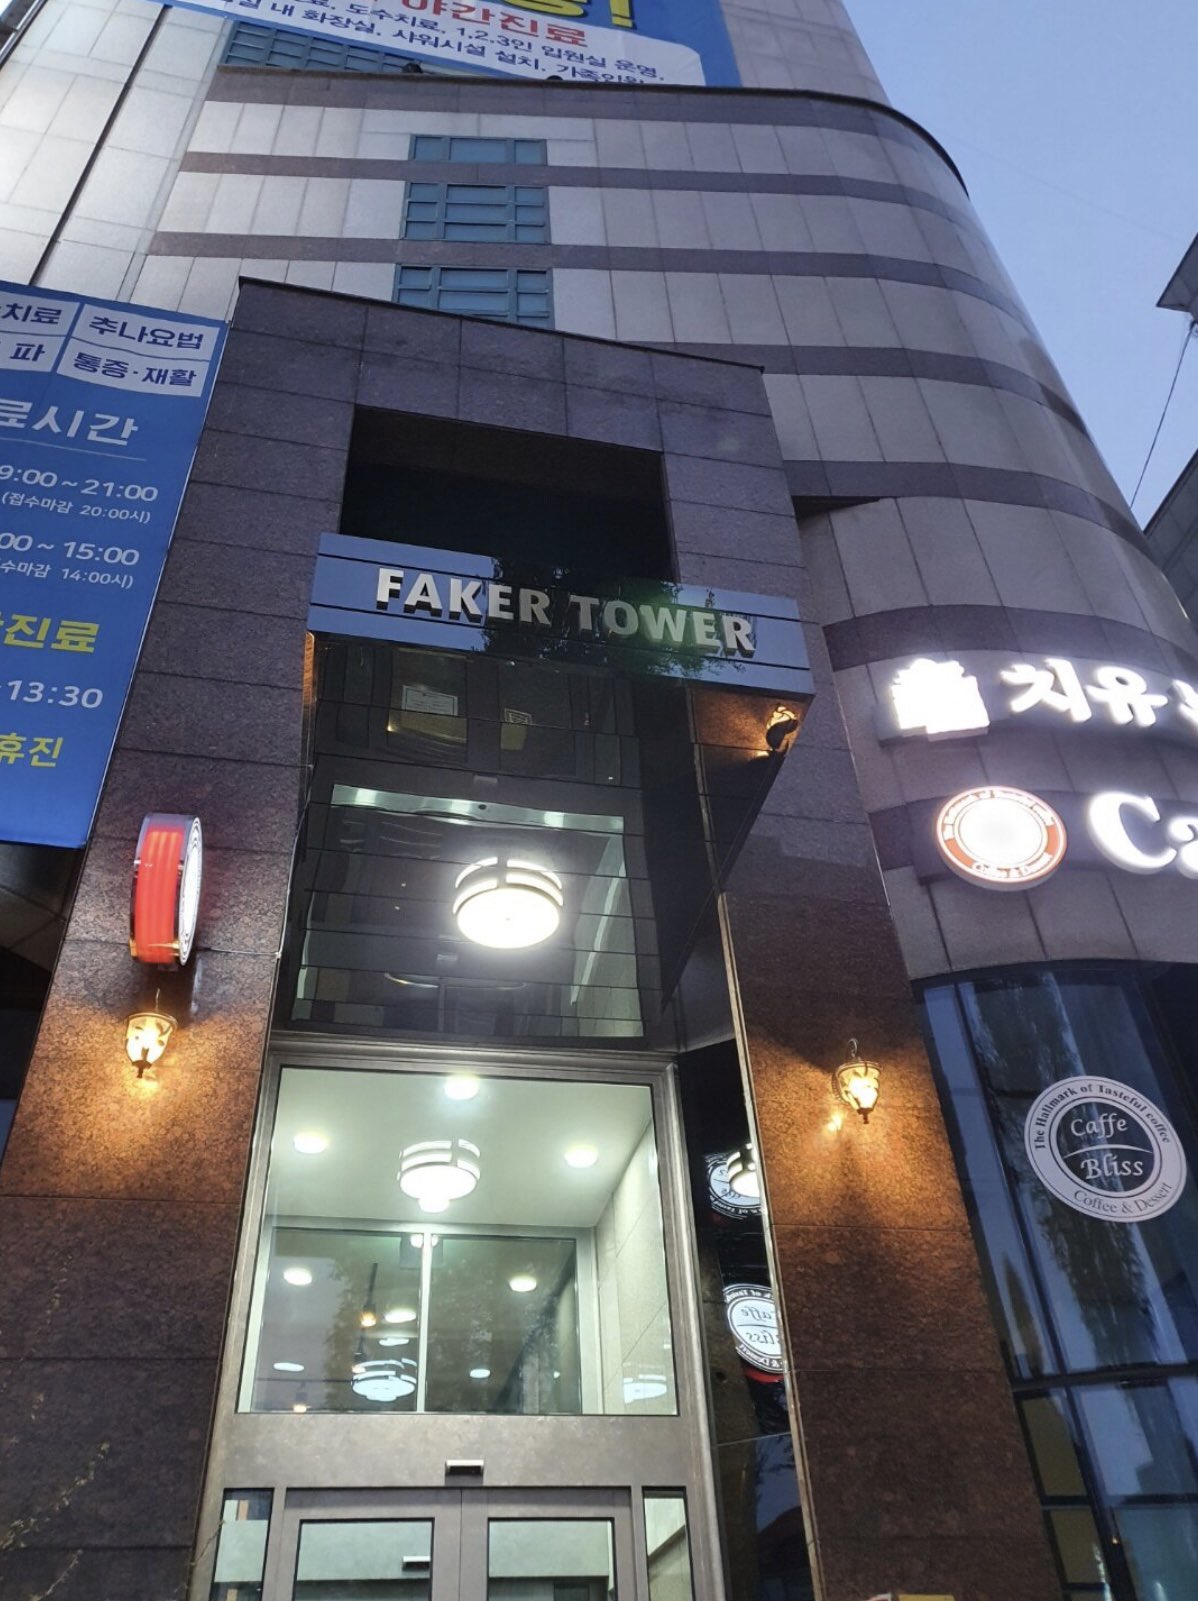 🍯 on Twitter: "The Faker Tower has 9 floors above ground and 2 floors  below ground. The main purpose of the building is a medical facility.  There's a medical facility in the